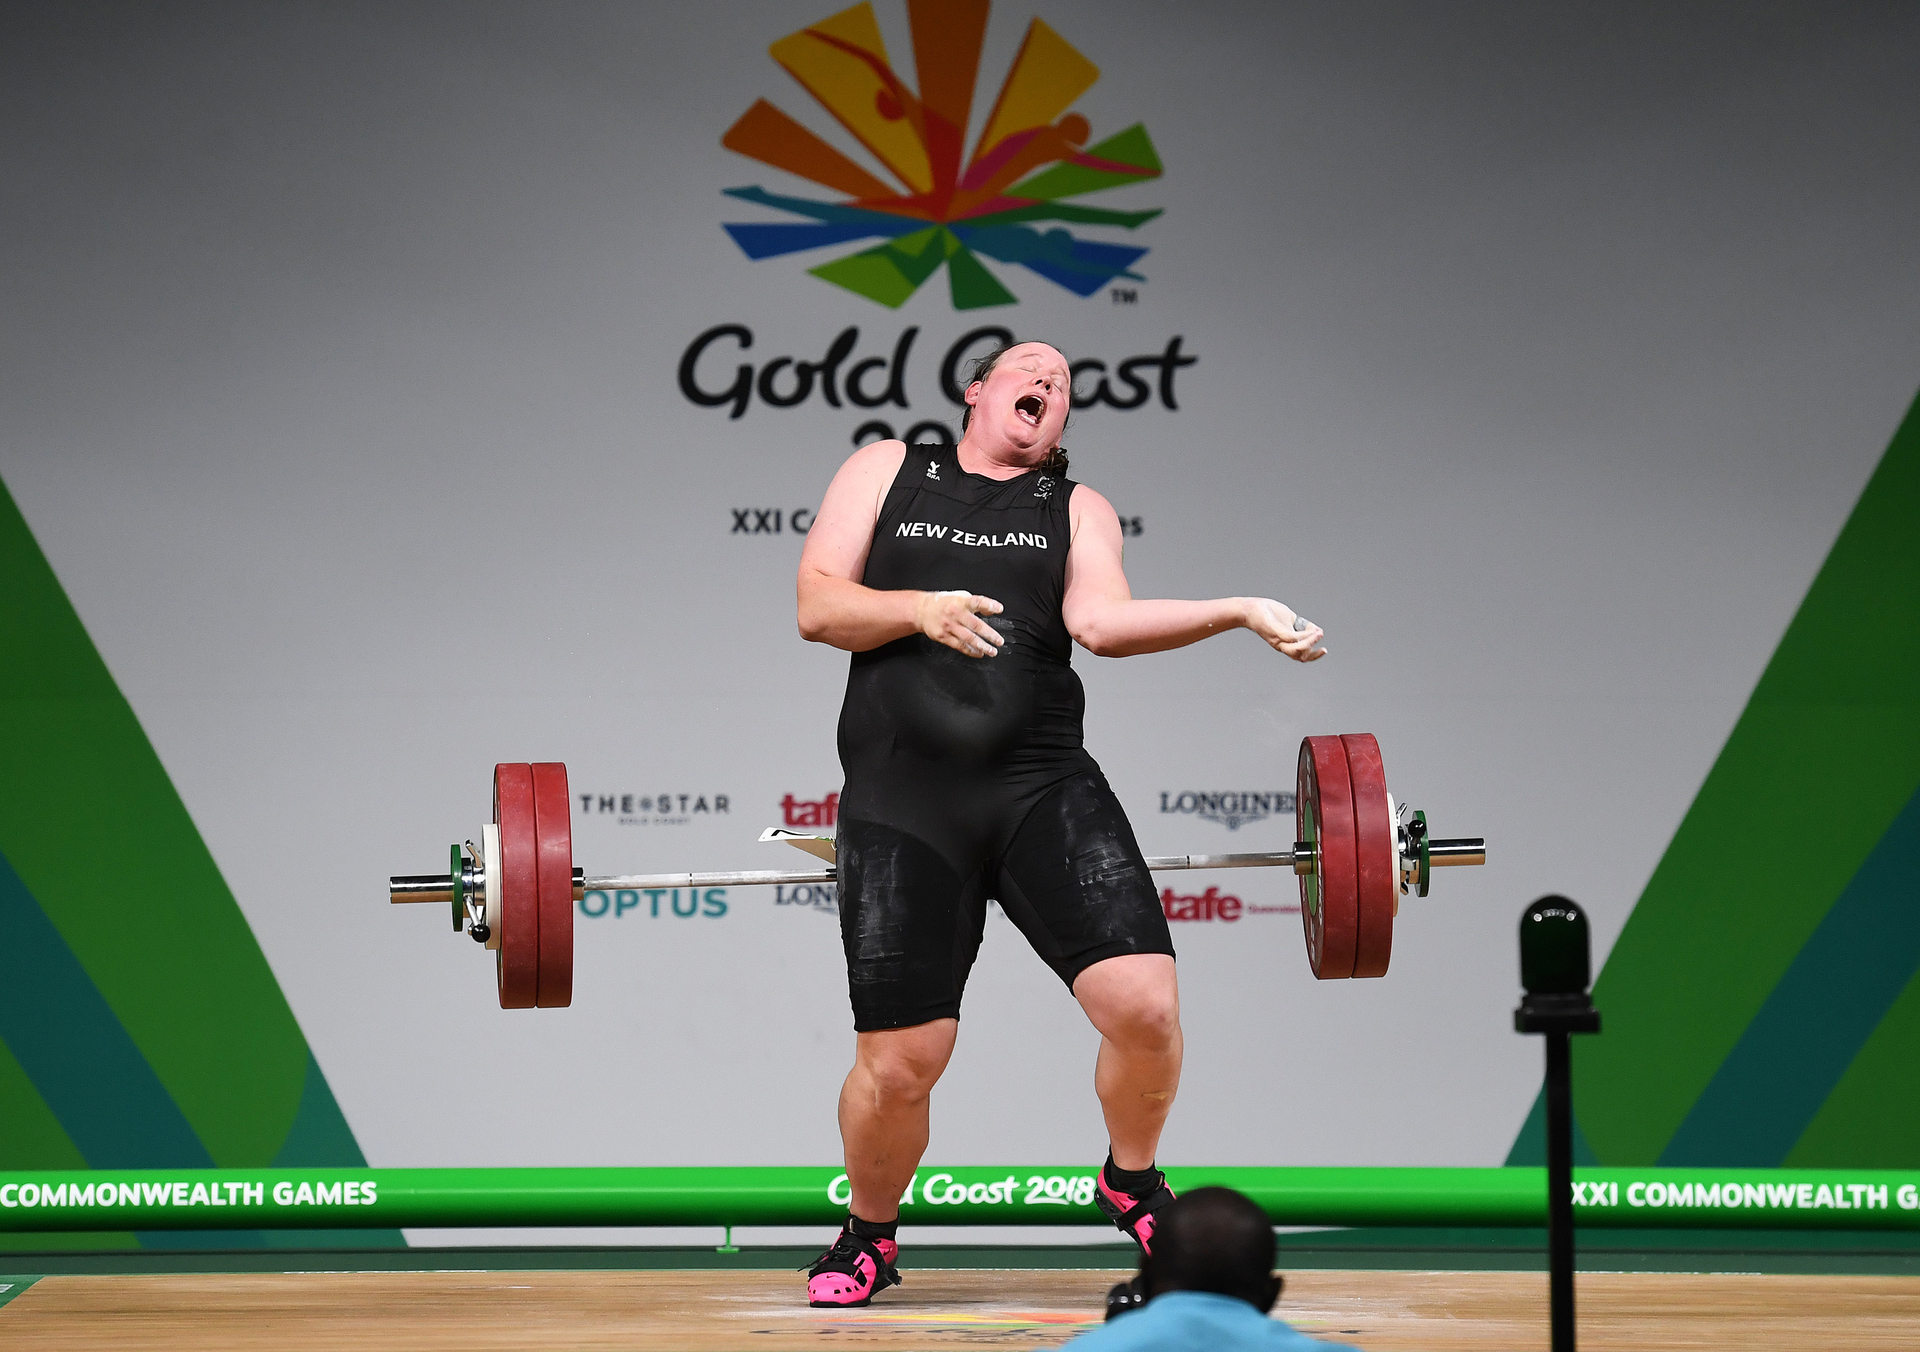 Tokyo Olympics Kiwi Weightlifter Laurel Hubbard Set To Become First Transgender Athlete To Compete At The Games Nz Herald